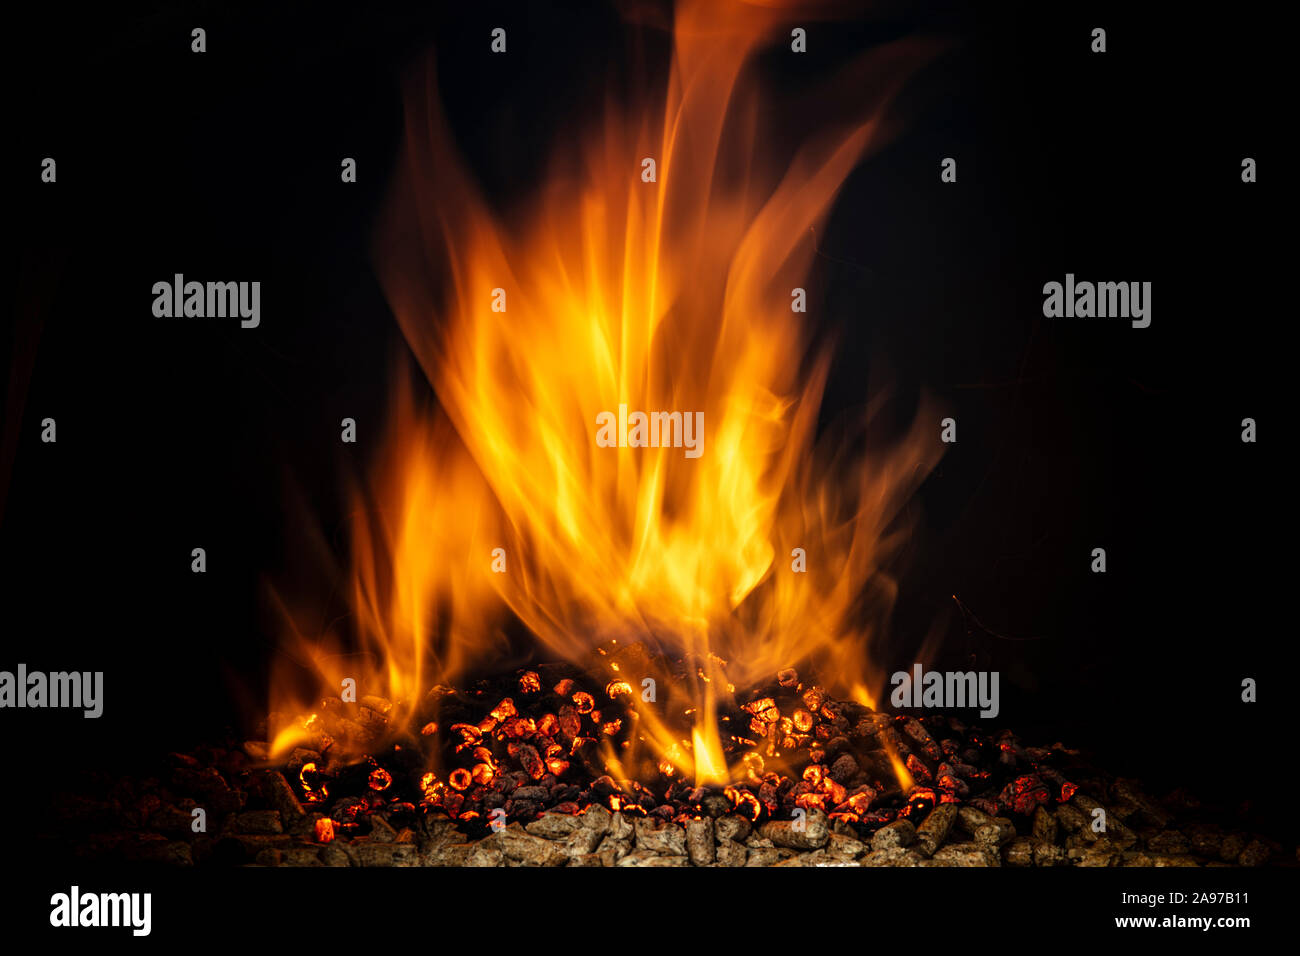 wood pellet burning with a live flame. ecological fuel concept. Stock Photo